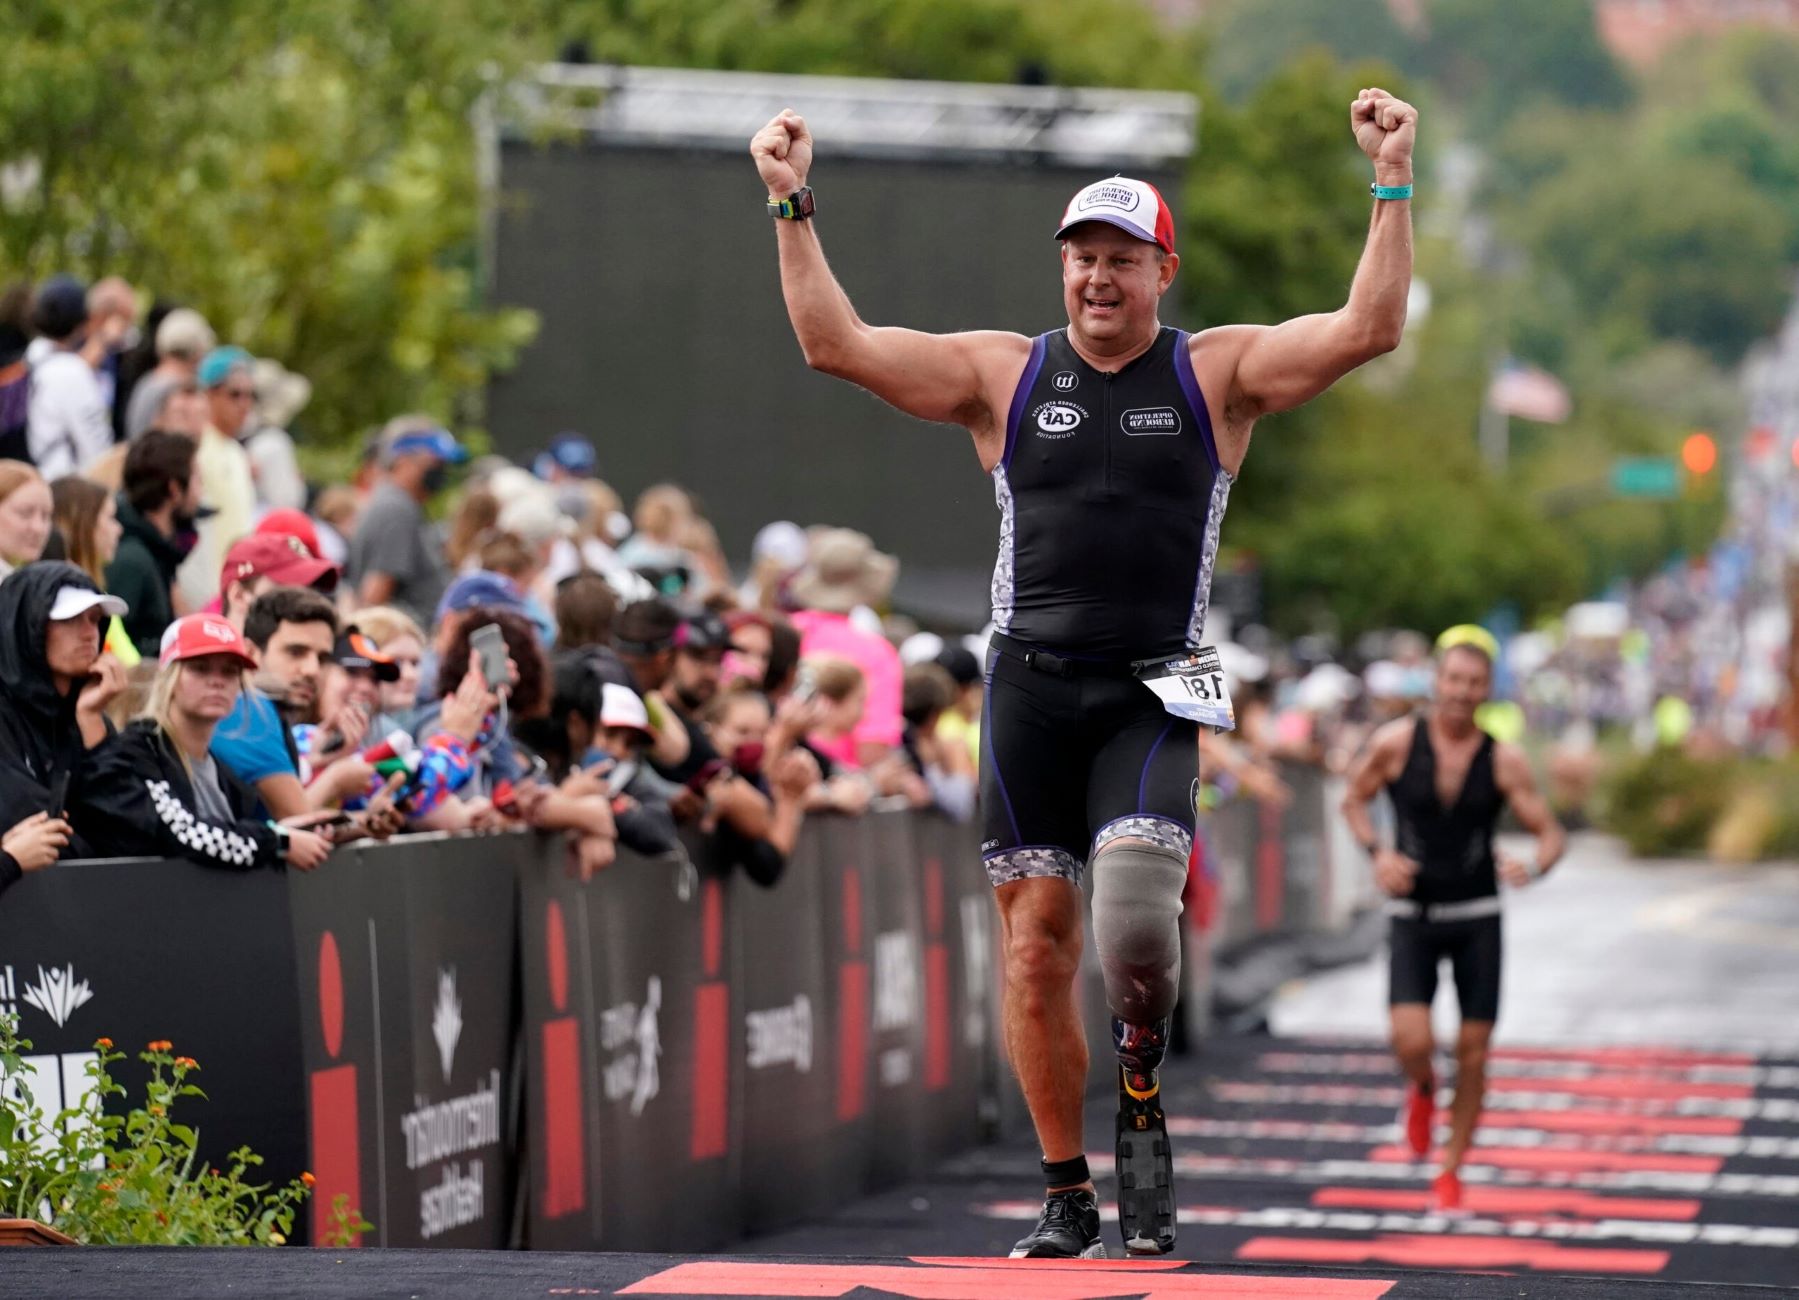 Training For Your First Half Ironman: A Guide To Ironman 70.3